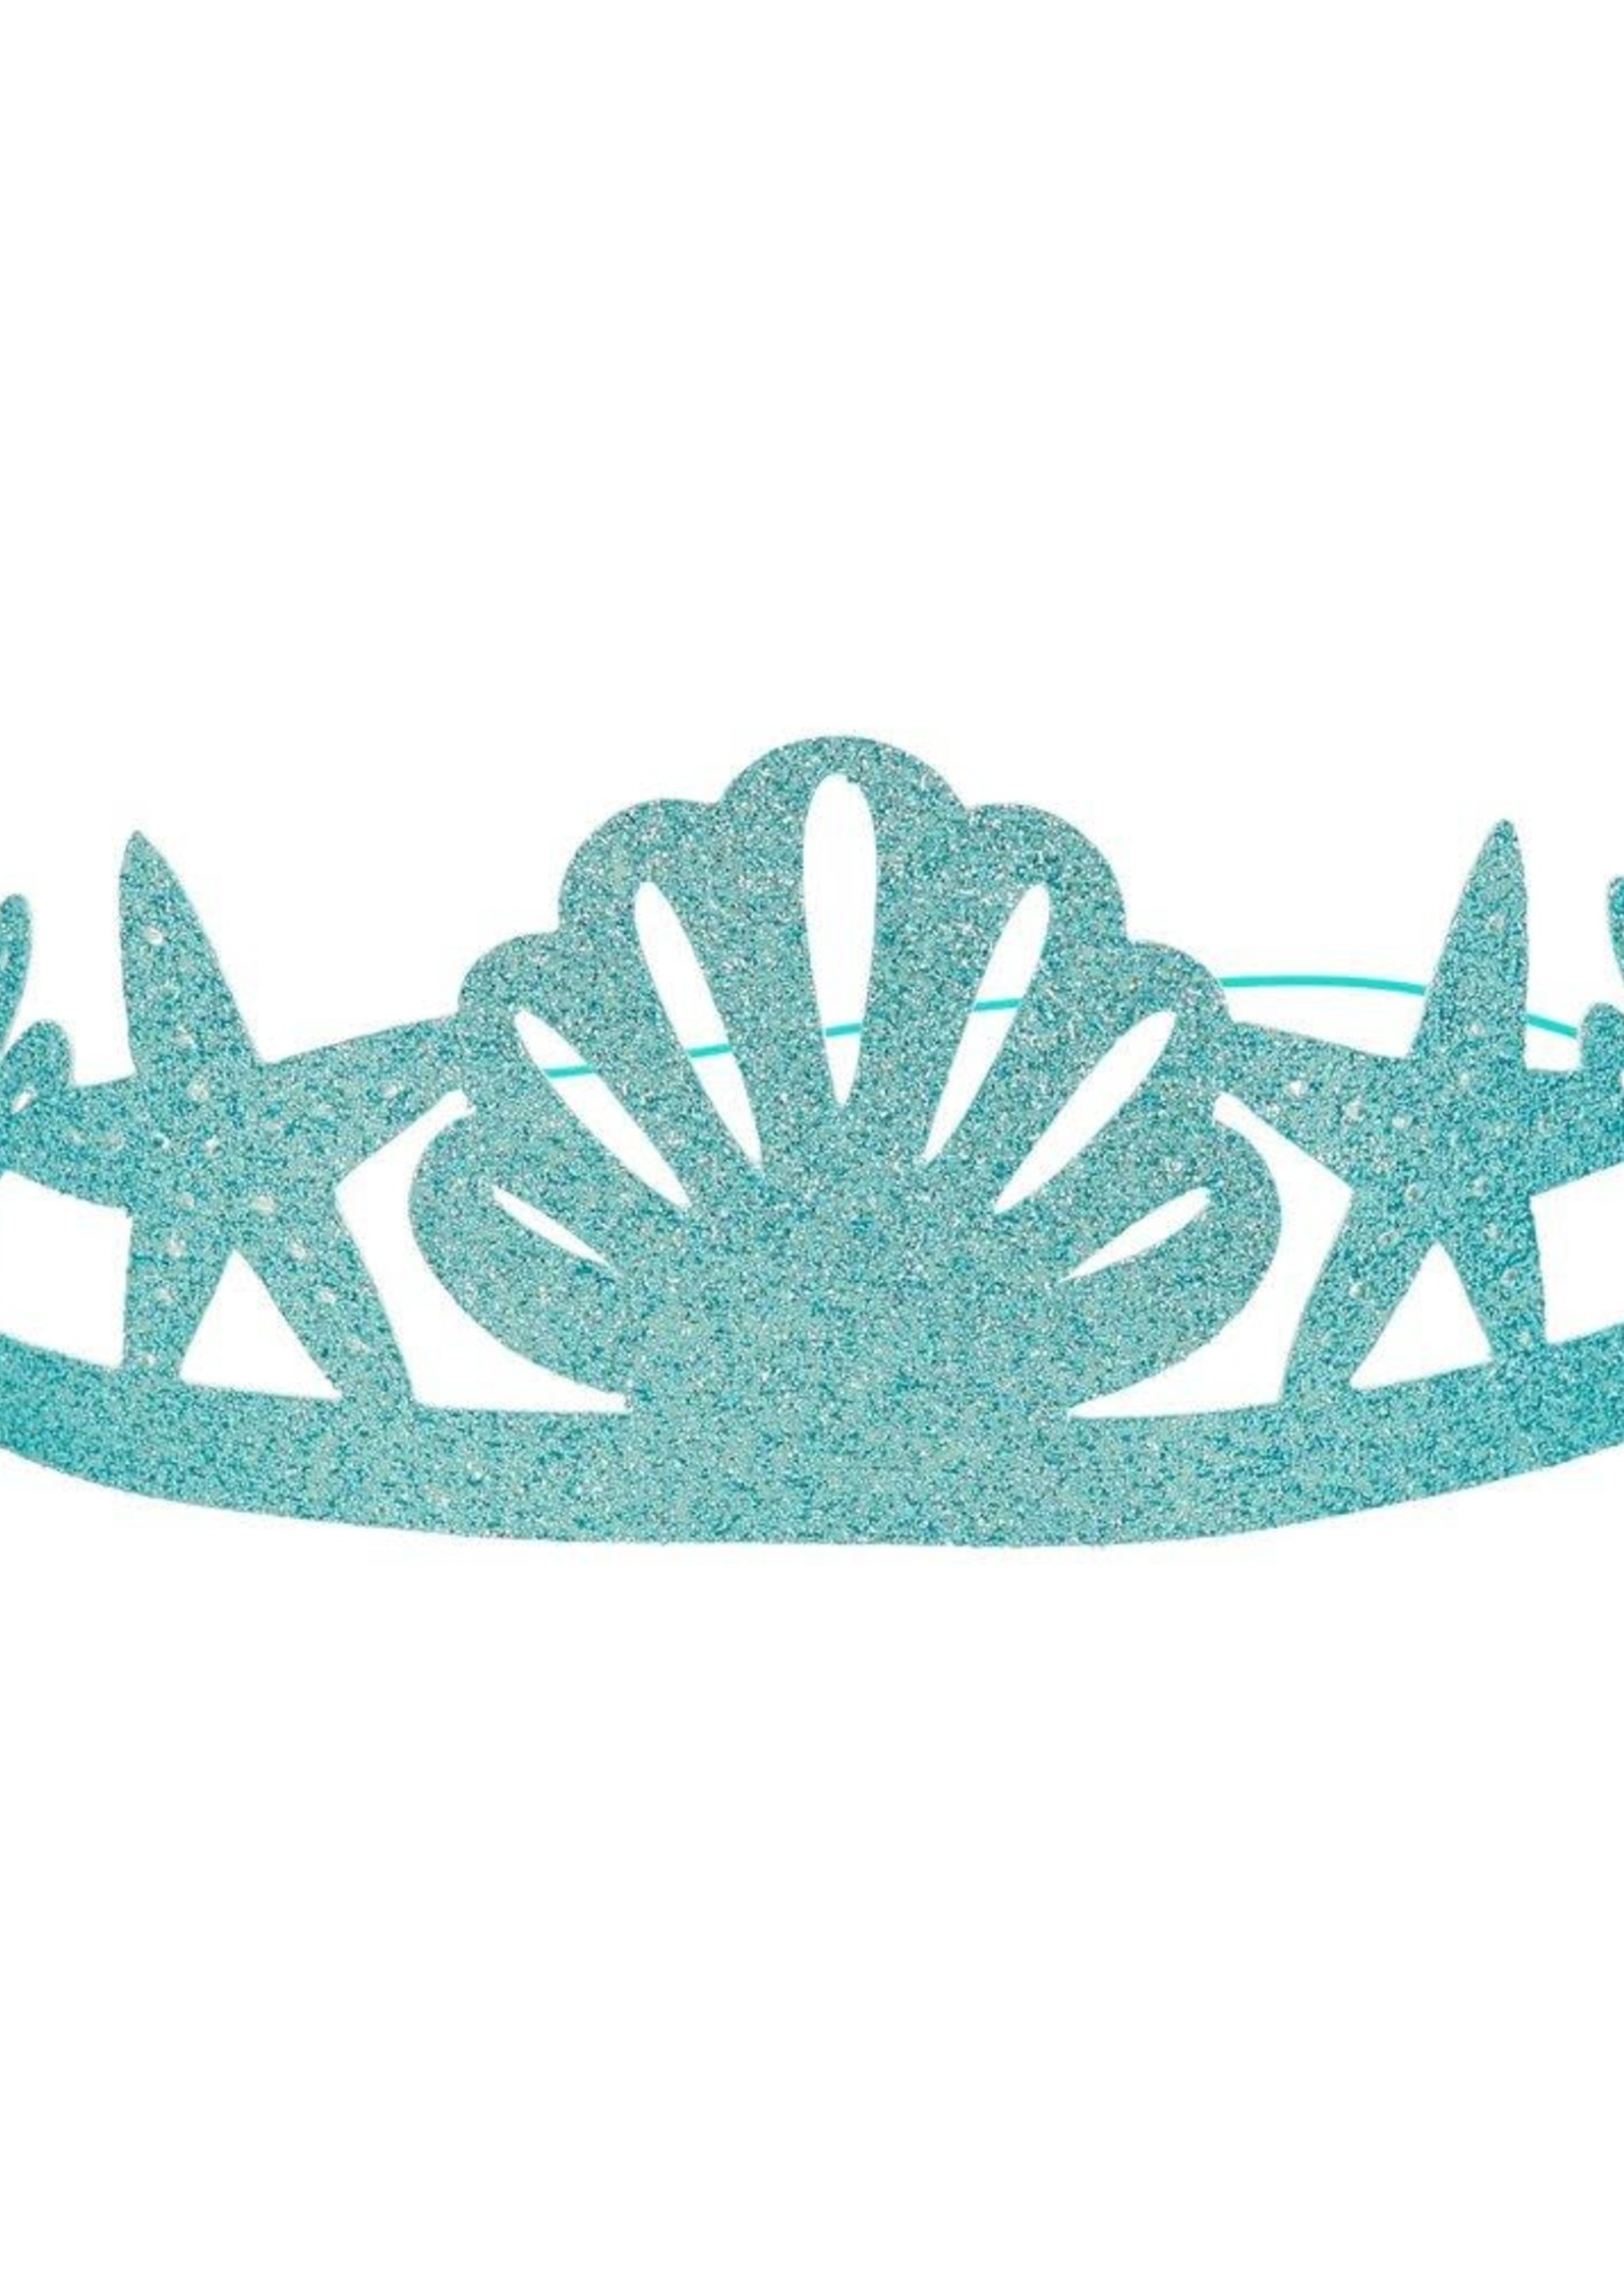 Creative Twist Events Mermaid Party Crowns